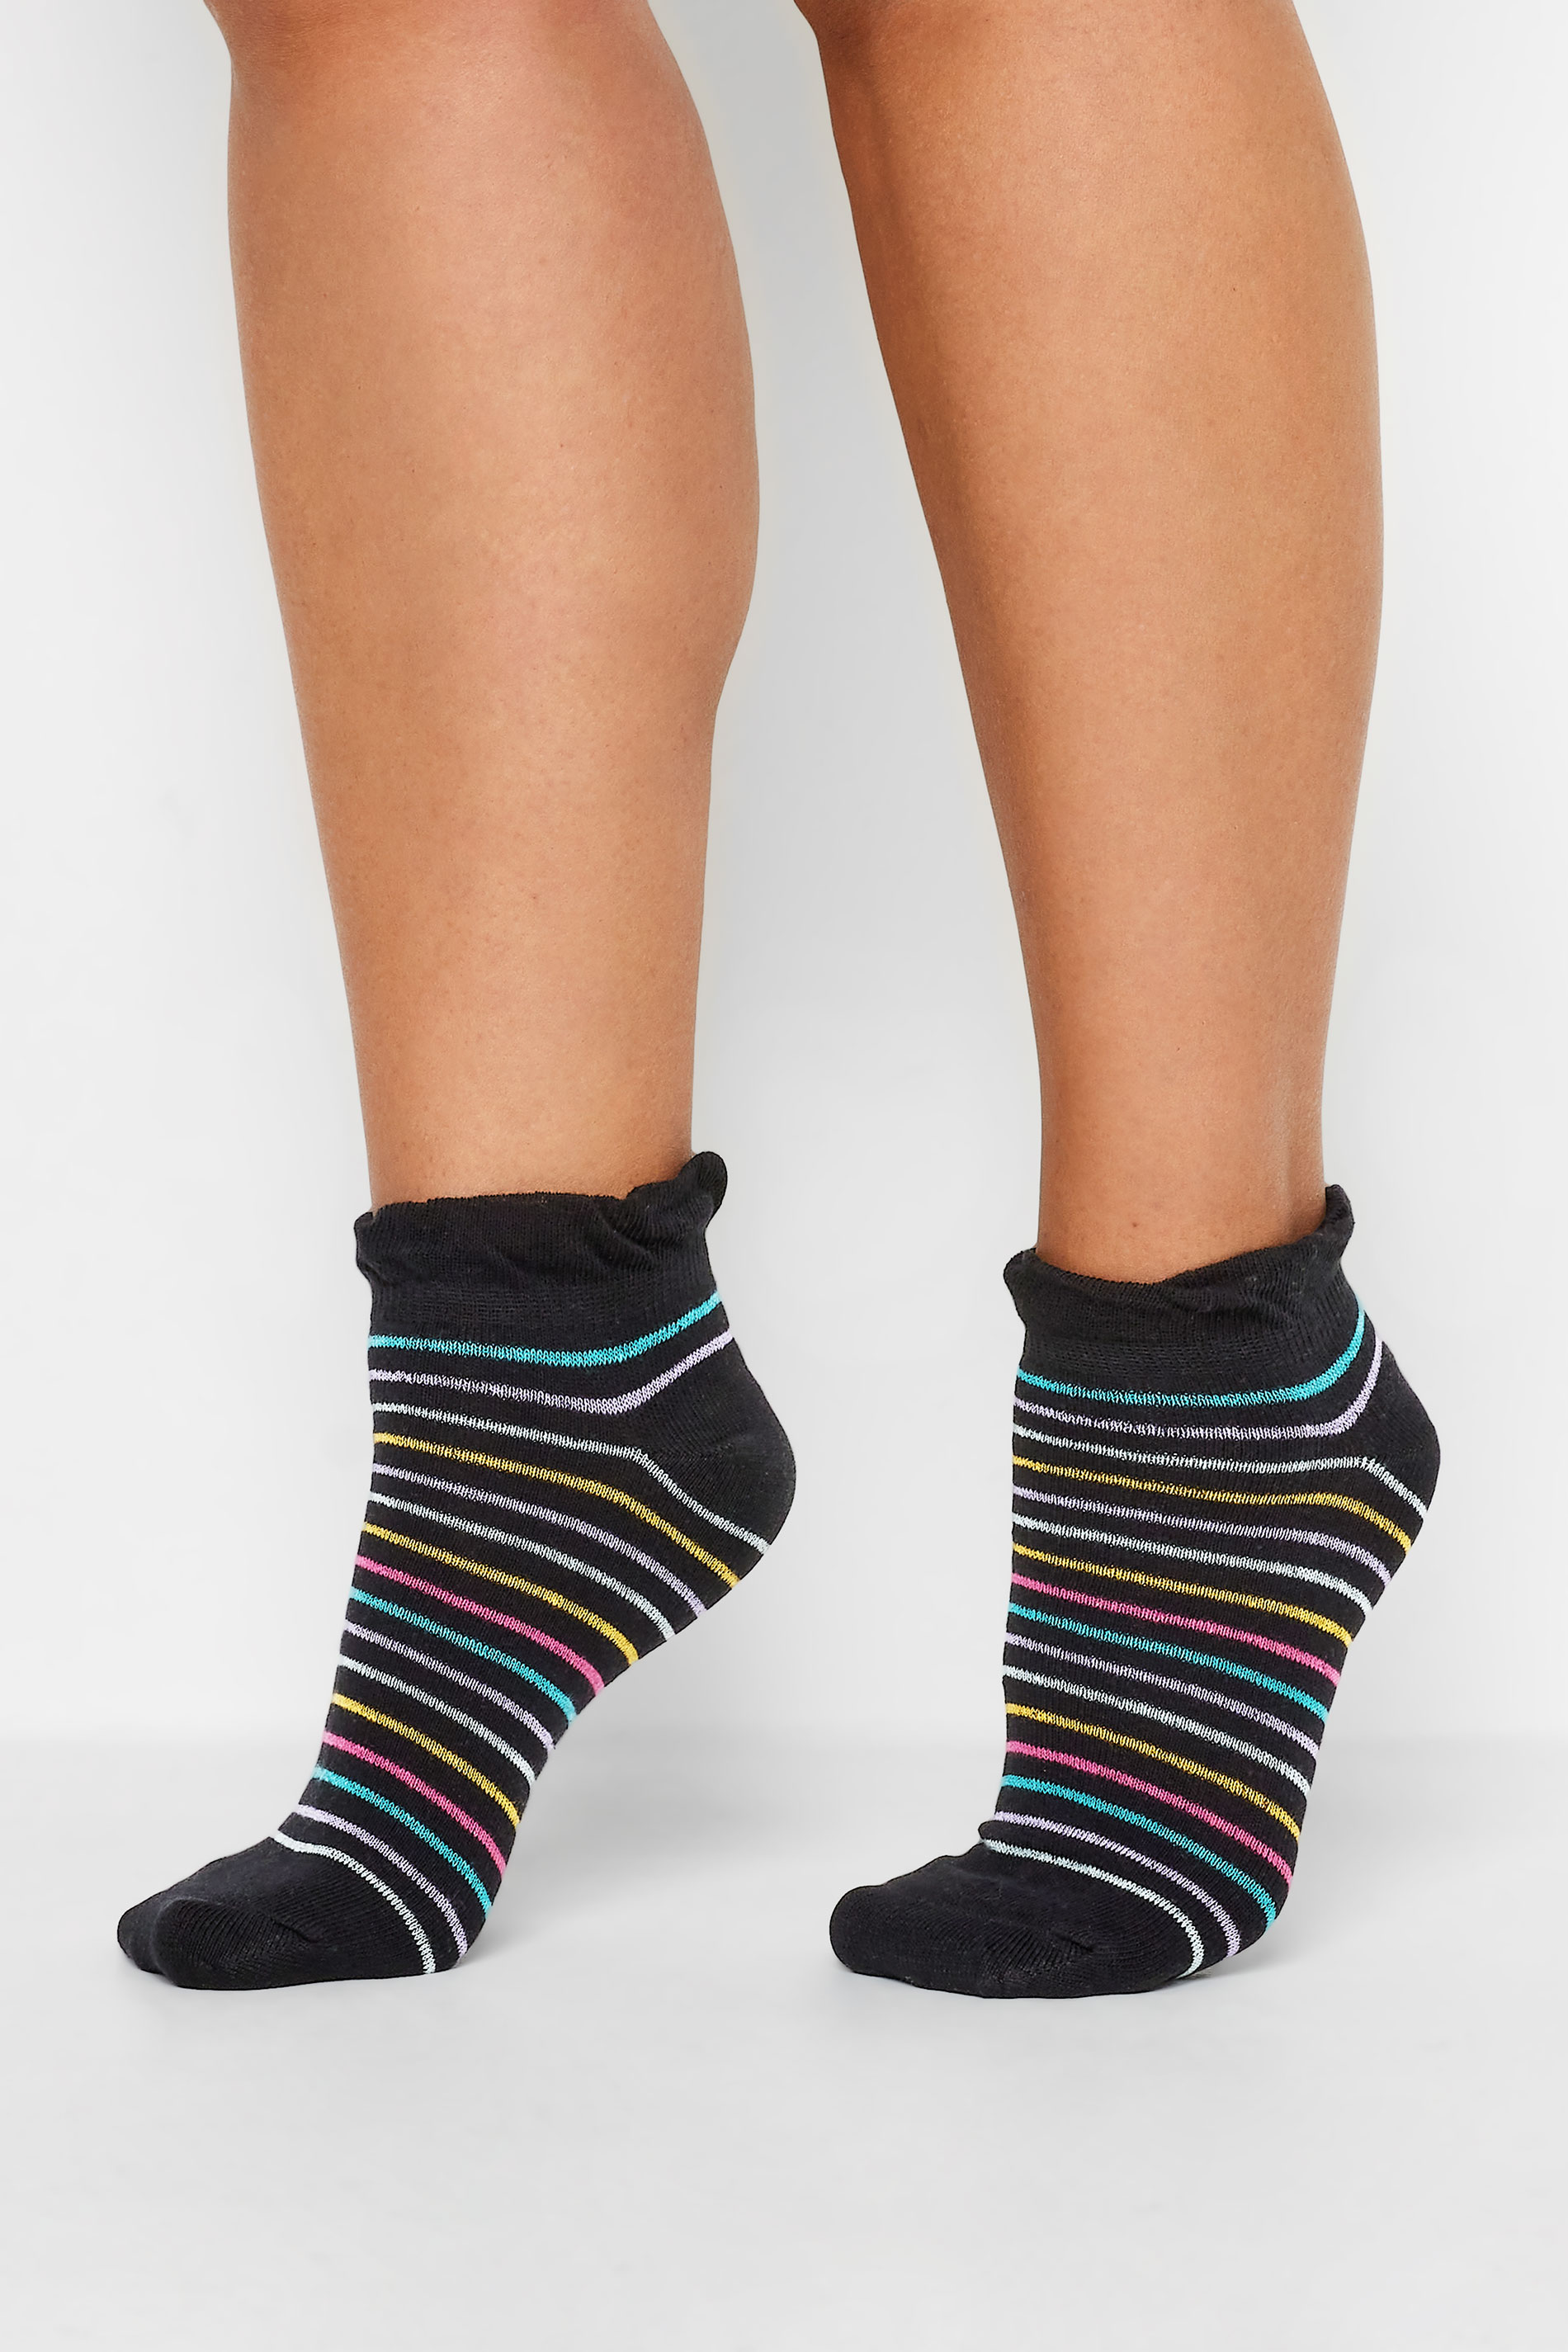 4 PACK Black Mixed Pattern Trainer Liner Socks | Yours Clothing 2